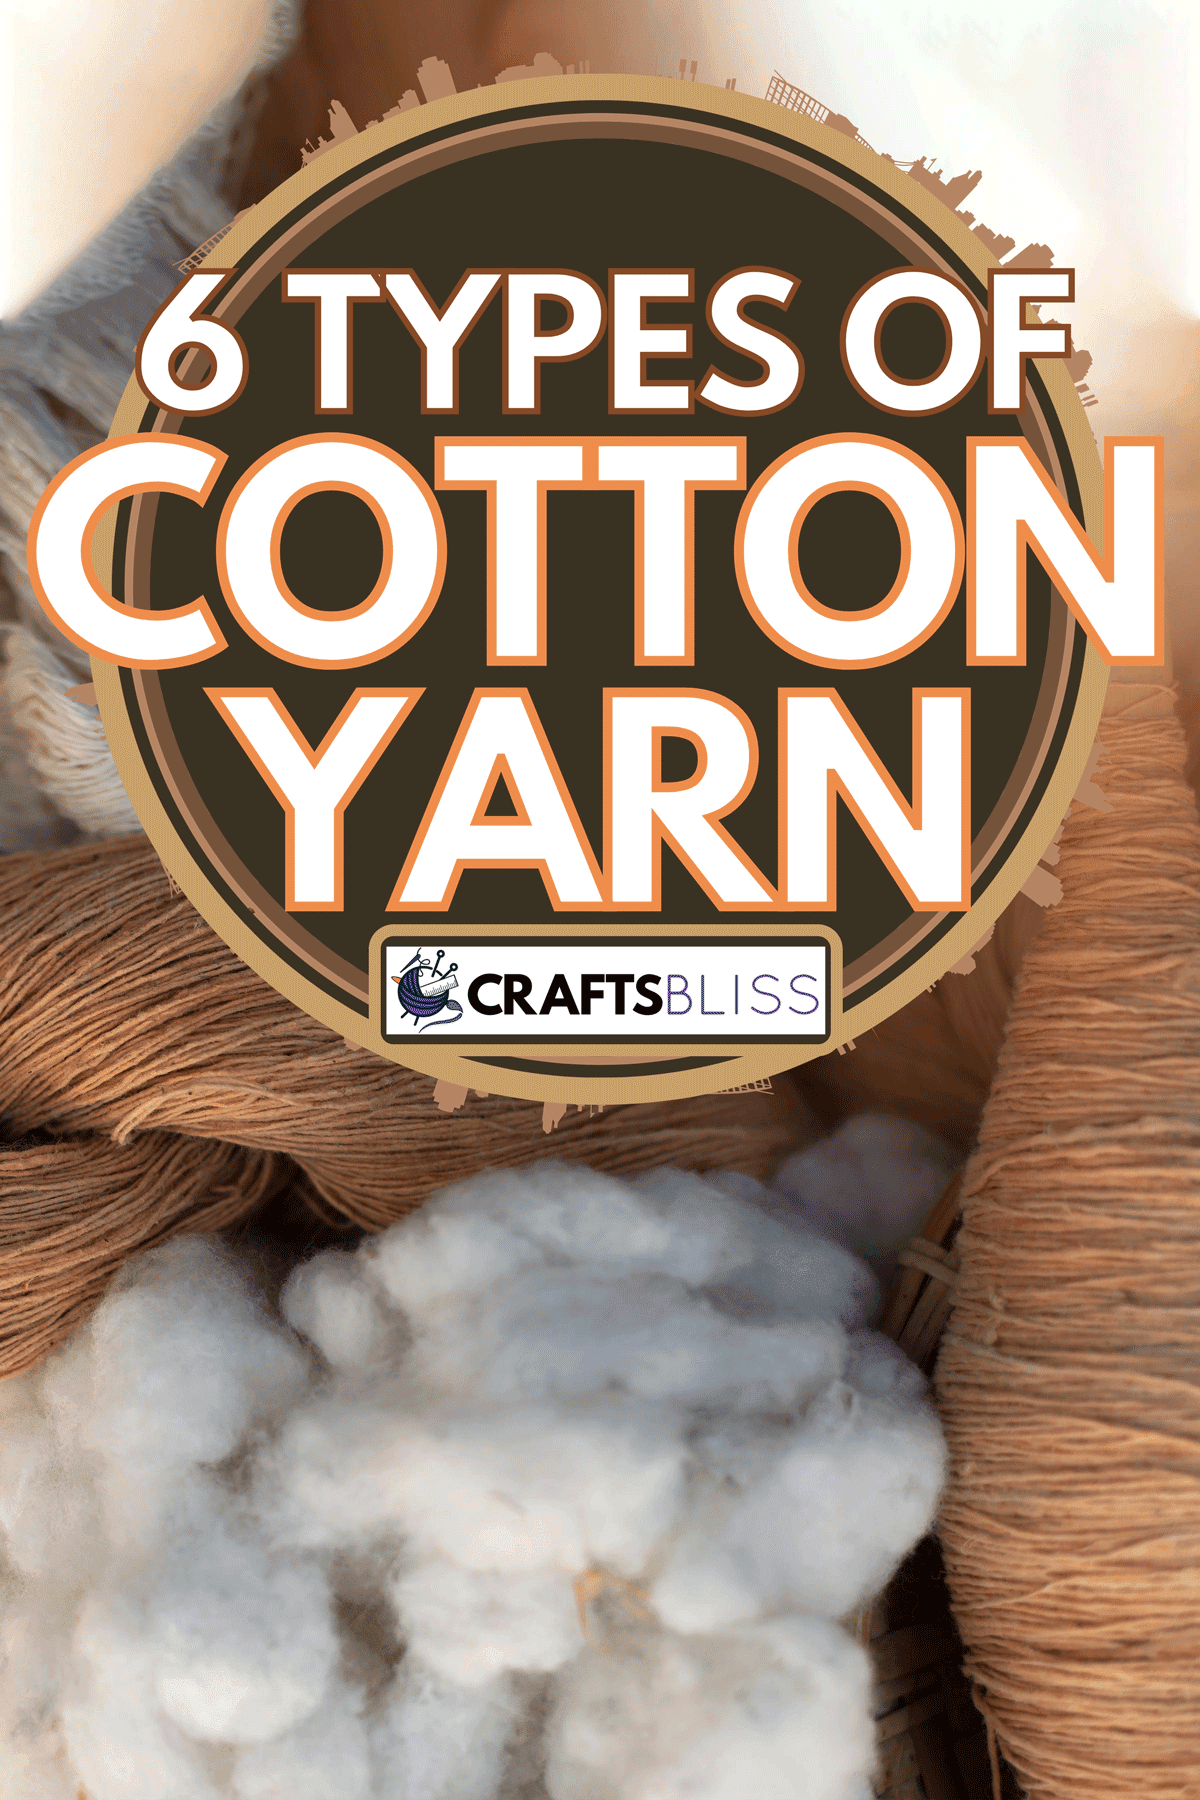 A natural cotton yarn in rolls, 6 Types Of Cotton Yarn